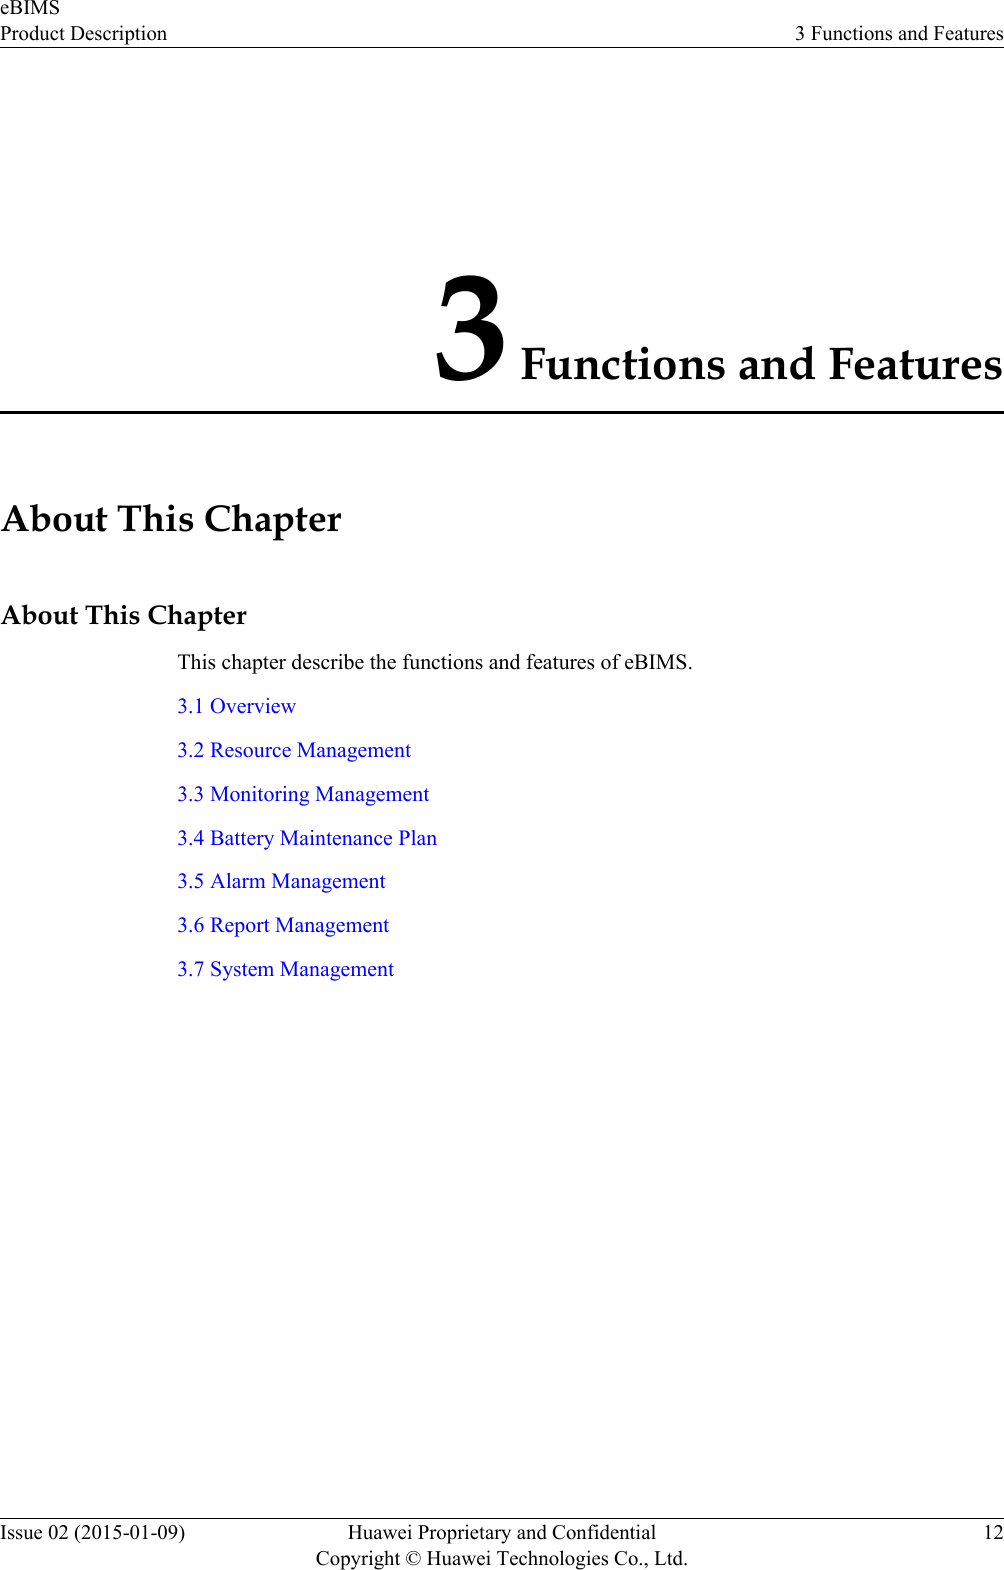 3 Functions and FeaturesAbout This ChapterAbout This ChapterThis chapter describe the functions and features of eBIMS.3.1 Overview3.2 Resource Management3.3 Monitoring Management3.4 Battery Maintenance Plan3.5 Alarm Management3.6 Report Management3.7 System ManagementeBIMSProduct Description 3 Functions and FeaturesIssue 02 (2015-01-09) Huawei Proprietary and ConfidentialCopyright © Huawei Technologies Co., Ltd.12